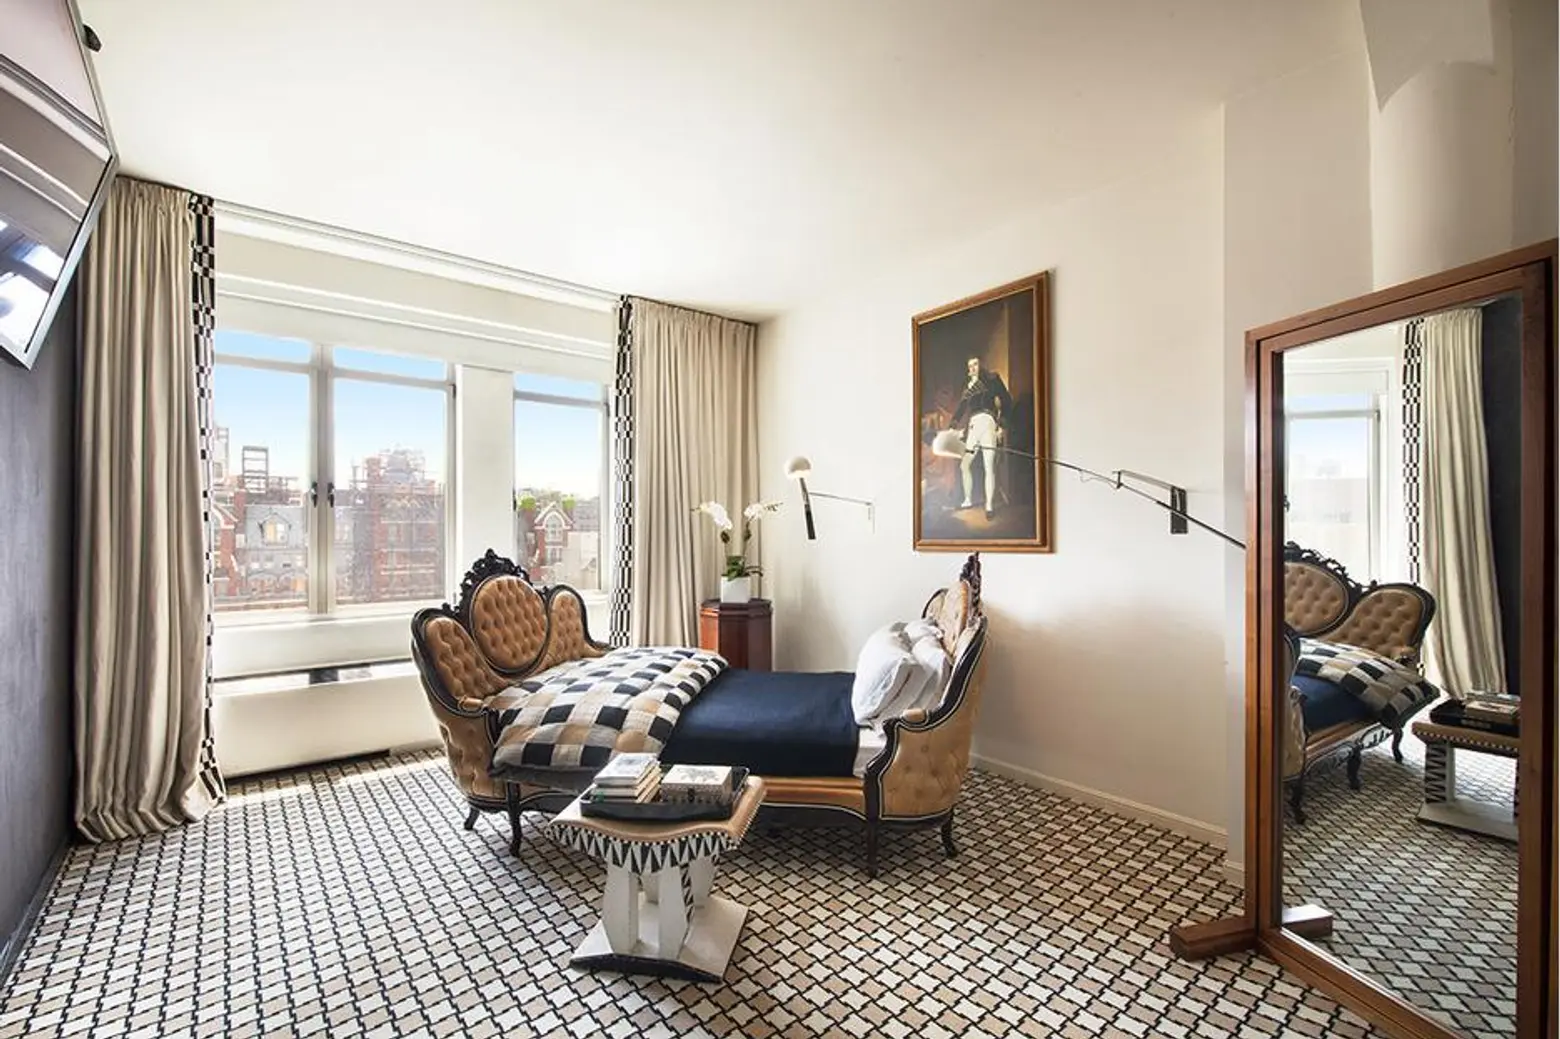 252 Seventh Avenue, Chelsea Mercantile, Anthony Baratta, Cool listing, manhattan condo for sale, bobby flay, marc jacobs, katie holmes, celebrity real estate, lance bass